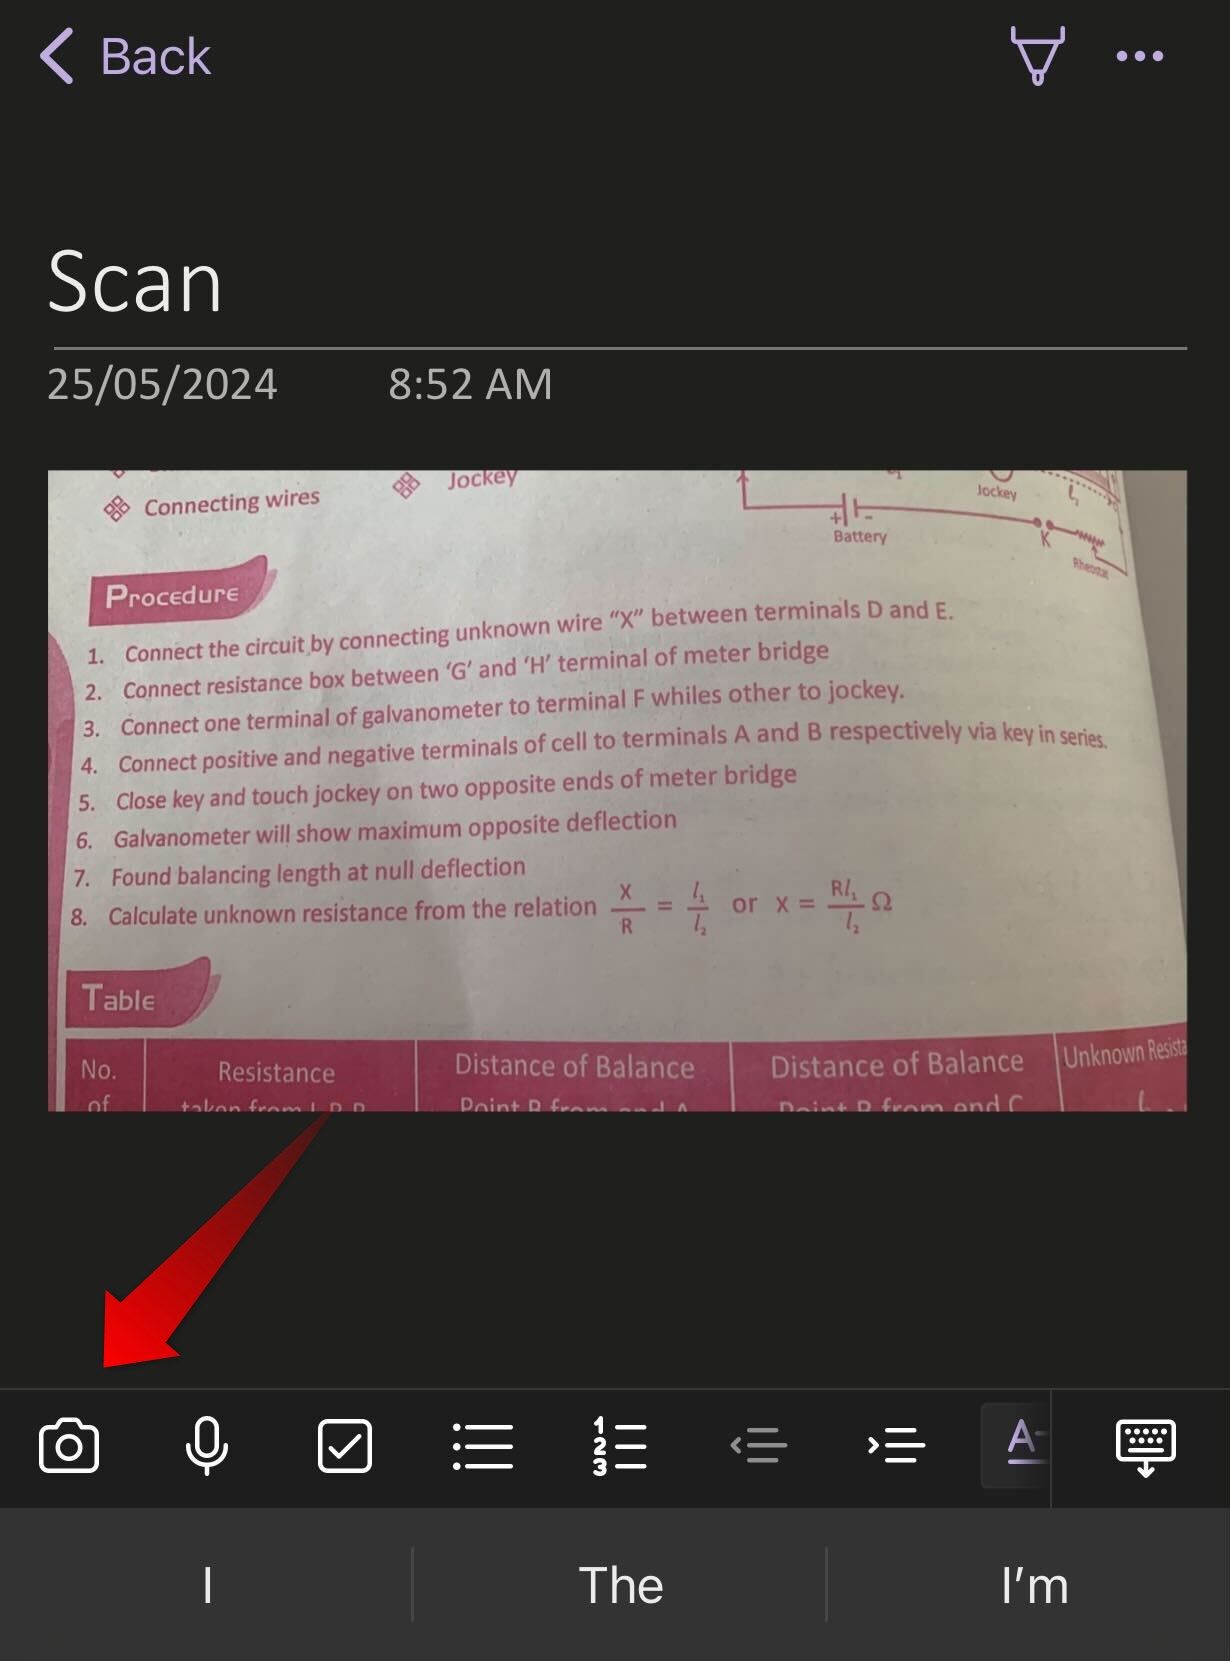 Scanning a page using OneNote's smartphone app.